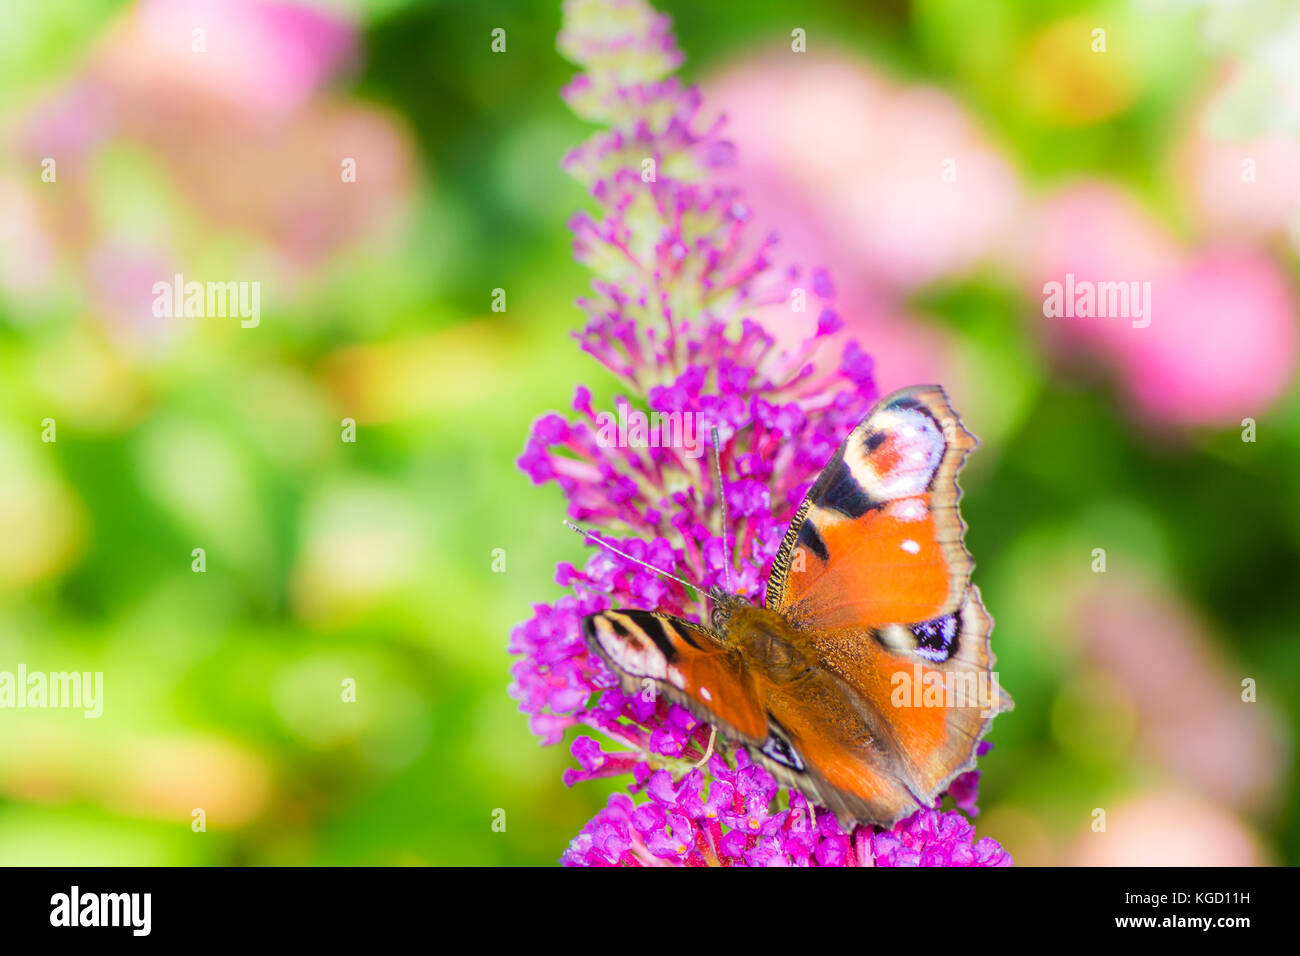 Macro of a peacock butterfly collecting nectar at a budleja blossom Stock Photo